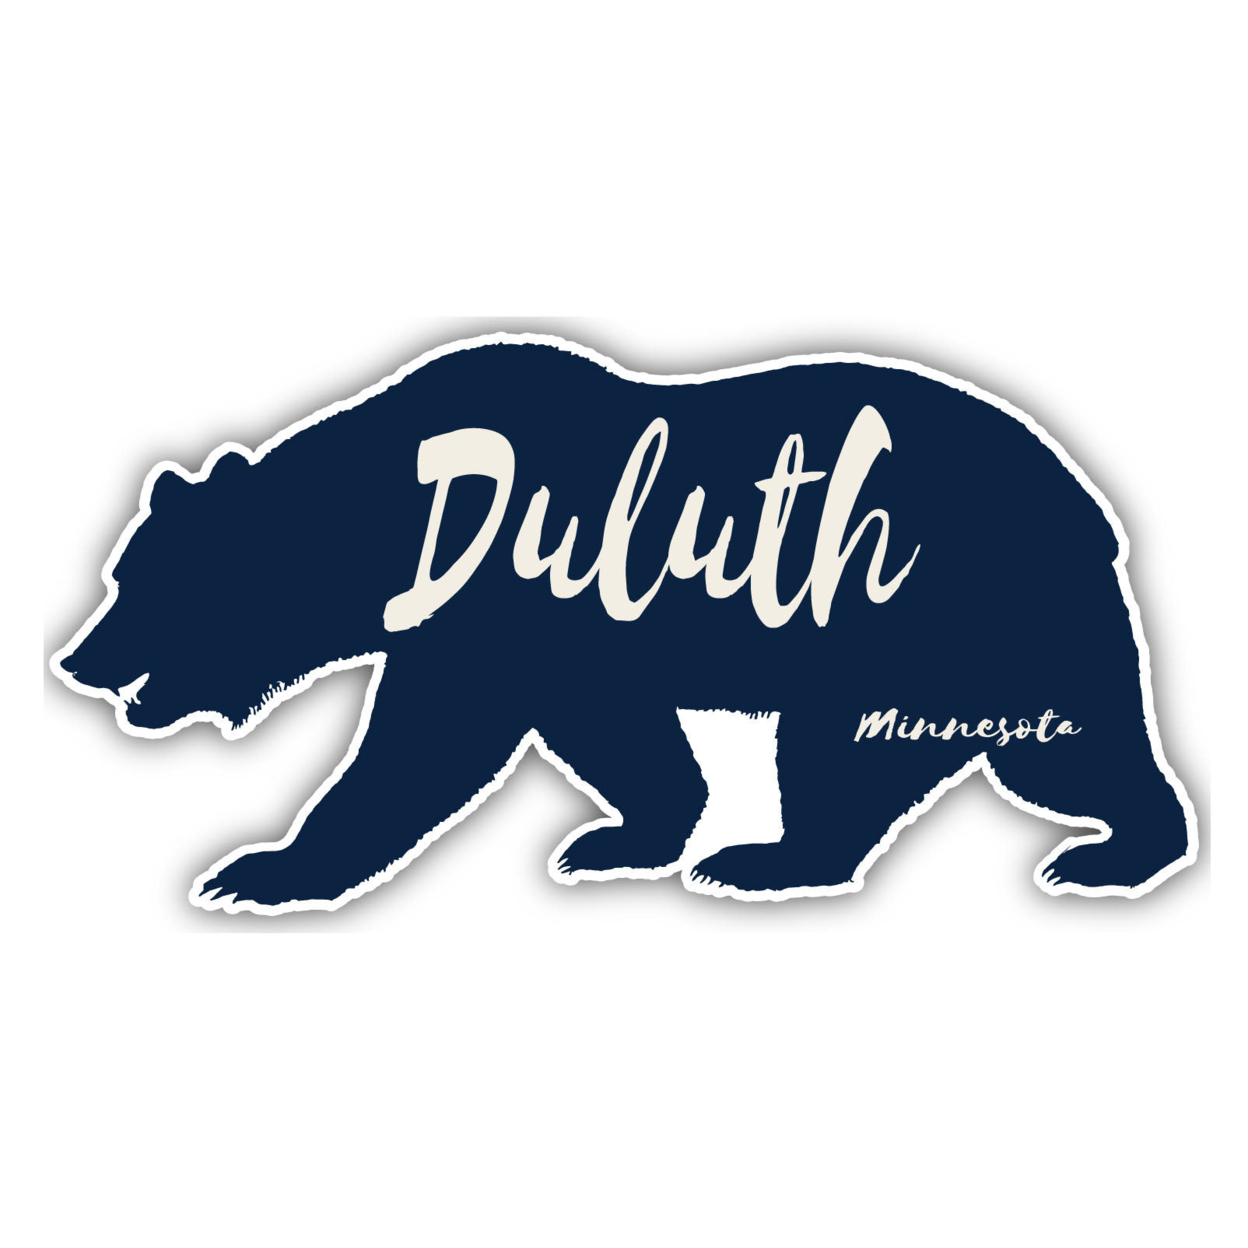 Duluth Minnesota Souvenir Decorative Stickers (Choose Theme And Size) - 4-Pack, 2-Inch, Adventures Awaits